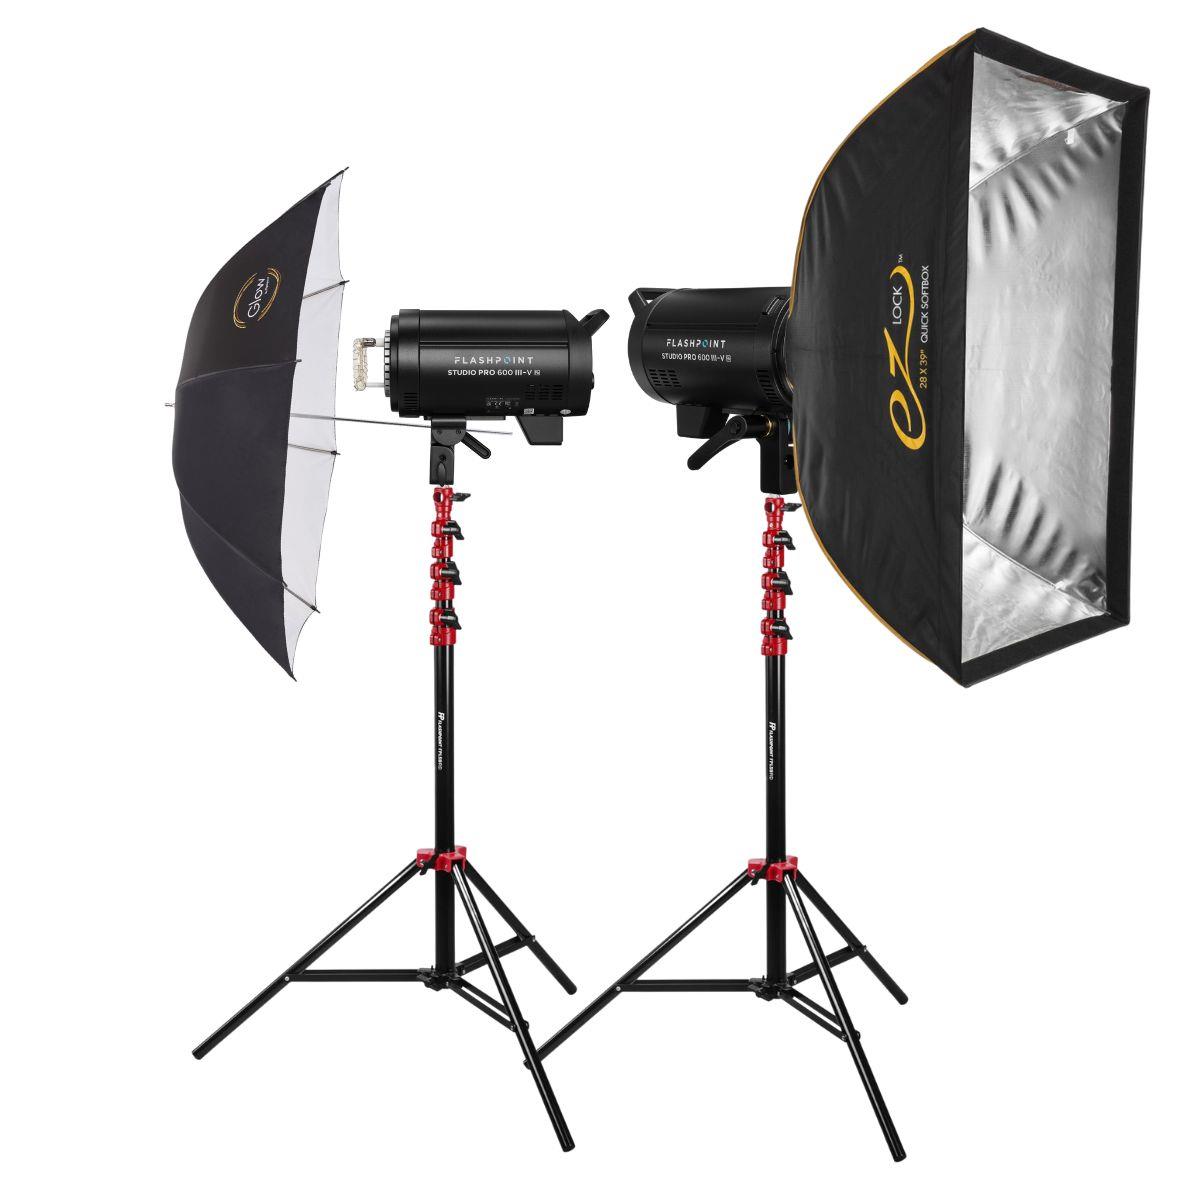 Image of Flashpoint Studio Pro 600 III-V R2 2-Light Kit with Stands